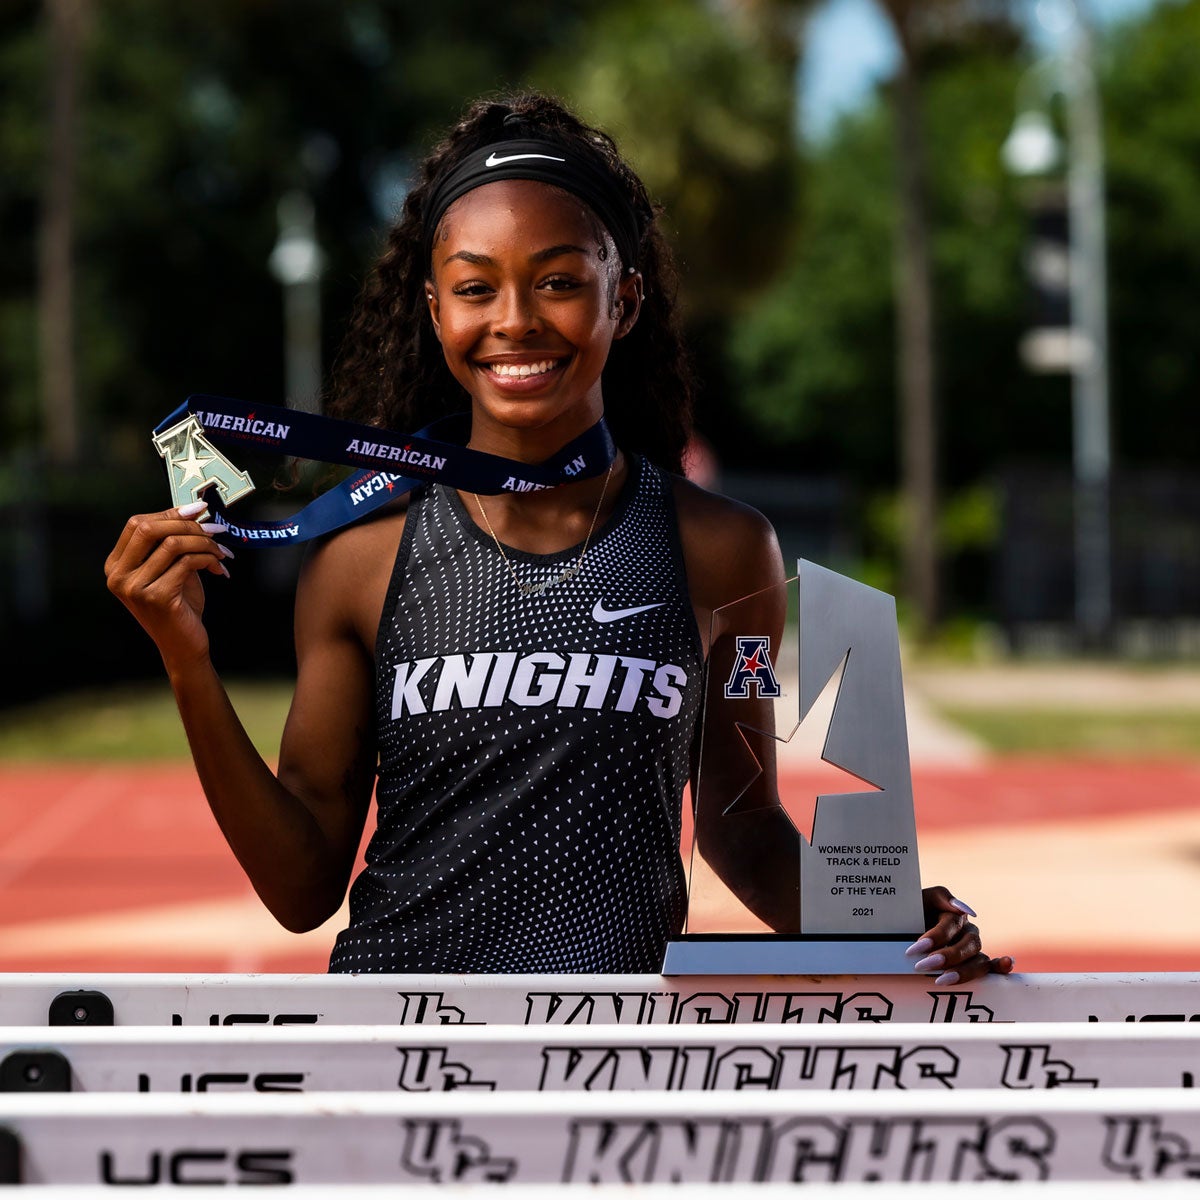 Rayniah Jones stands near hurdles, holding AAC medal and trophy